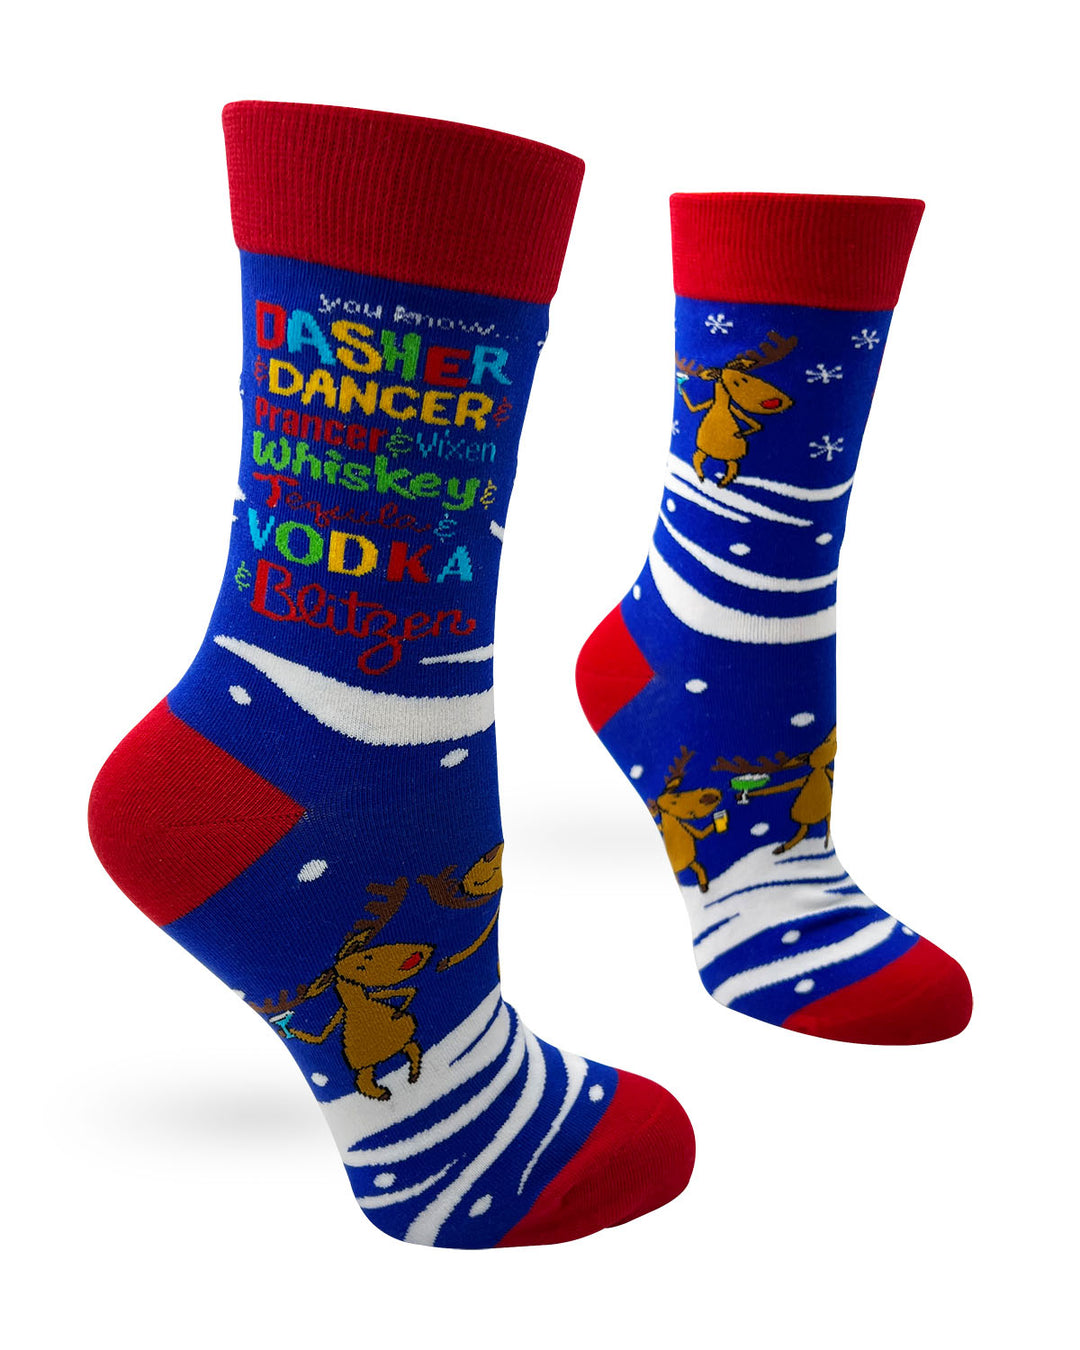 You Know Dasher and Dancer and Prancer and Vixen Whiskey Tequila and Vodka Blitzen Women's Novelty Socks